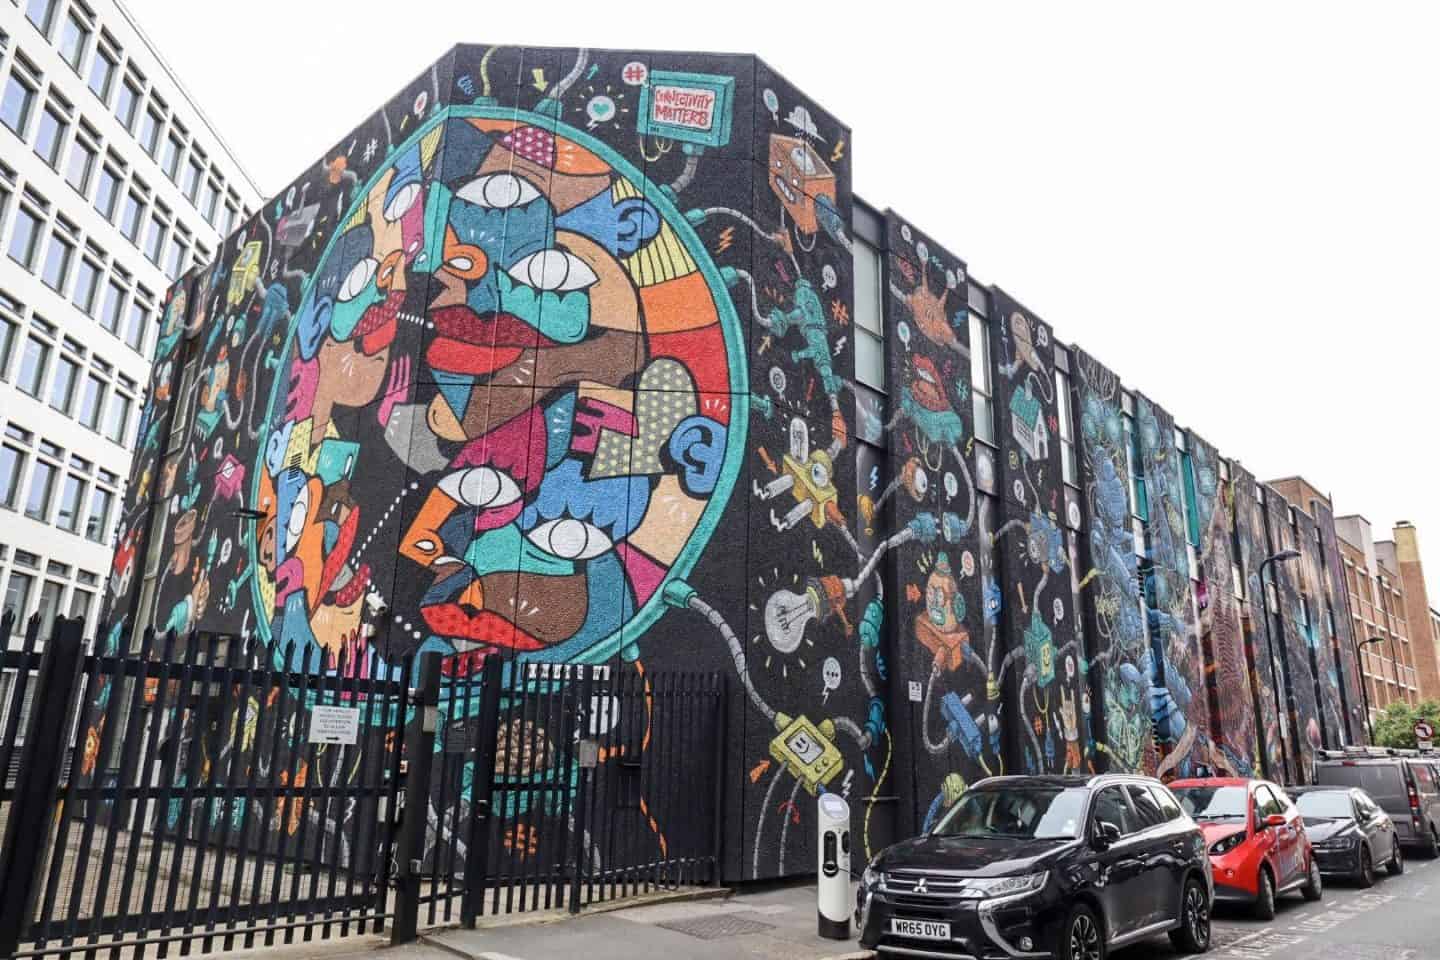 places to go in Shoreditch, Lane Street Art